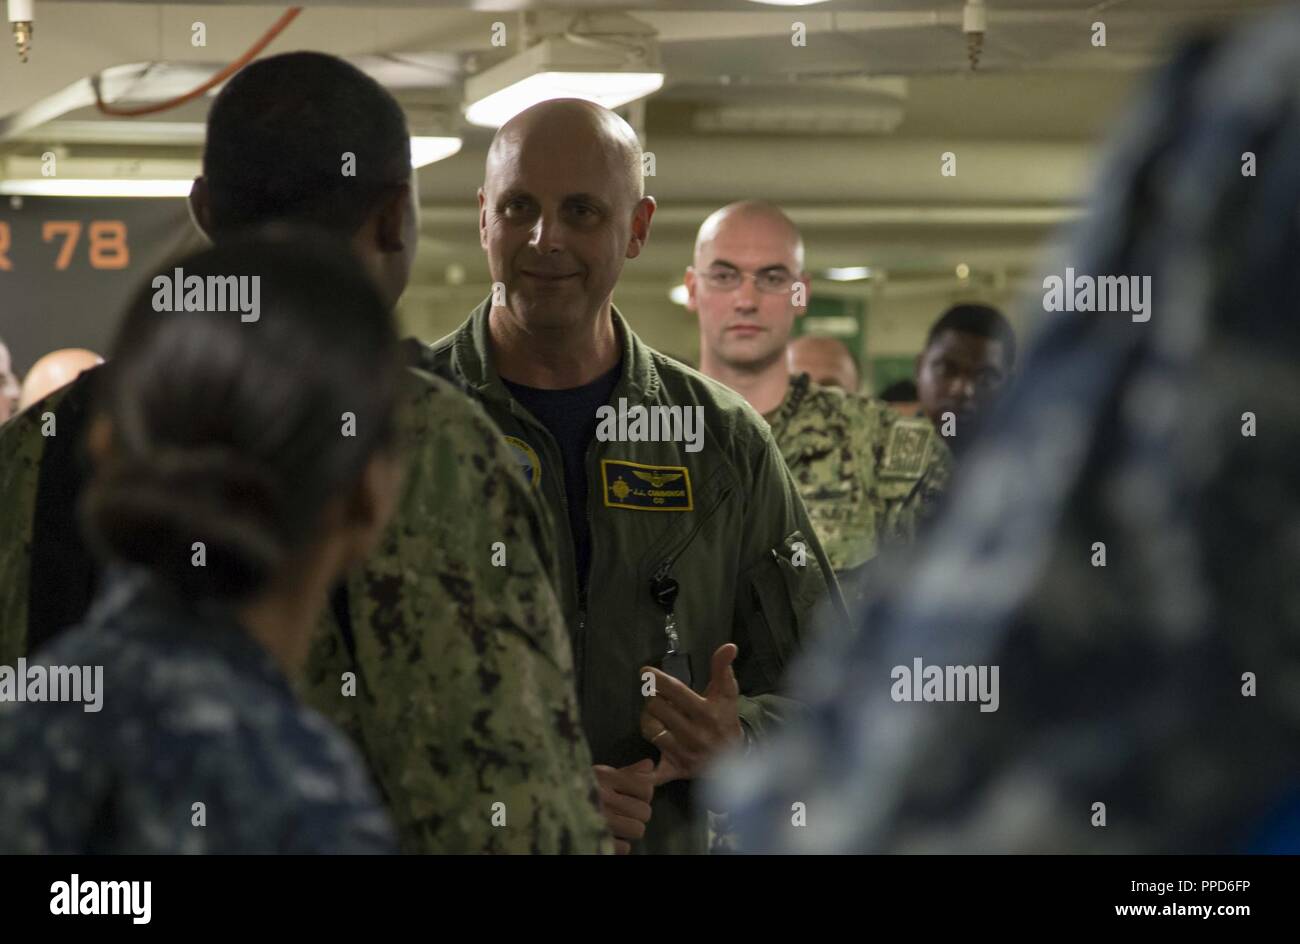 NEWPORT NEWS, Va. (Aug. 23, 2018) Capt. John J. Cummings, USS Gerald R. Ford's (CVN 78) commanding officer, speaks to Aviation Ordnanceman 1st Class Donald Harris, from Tallahassee, Fla., after he was awarded Aviation Ordnanceman of the Year. Harris will be promoted to chief petty officer next month. Stock Photo